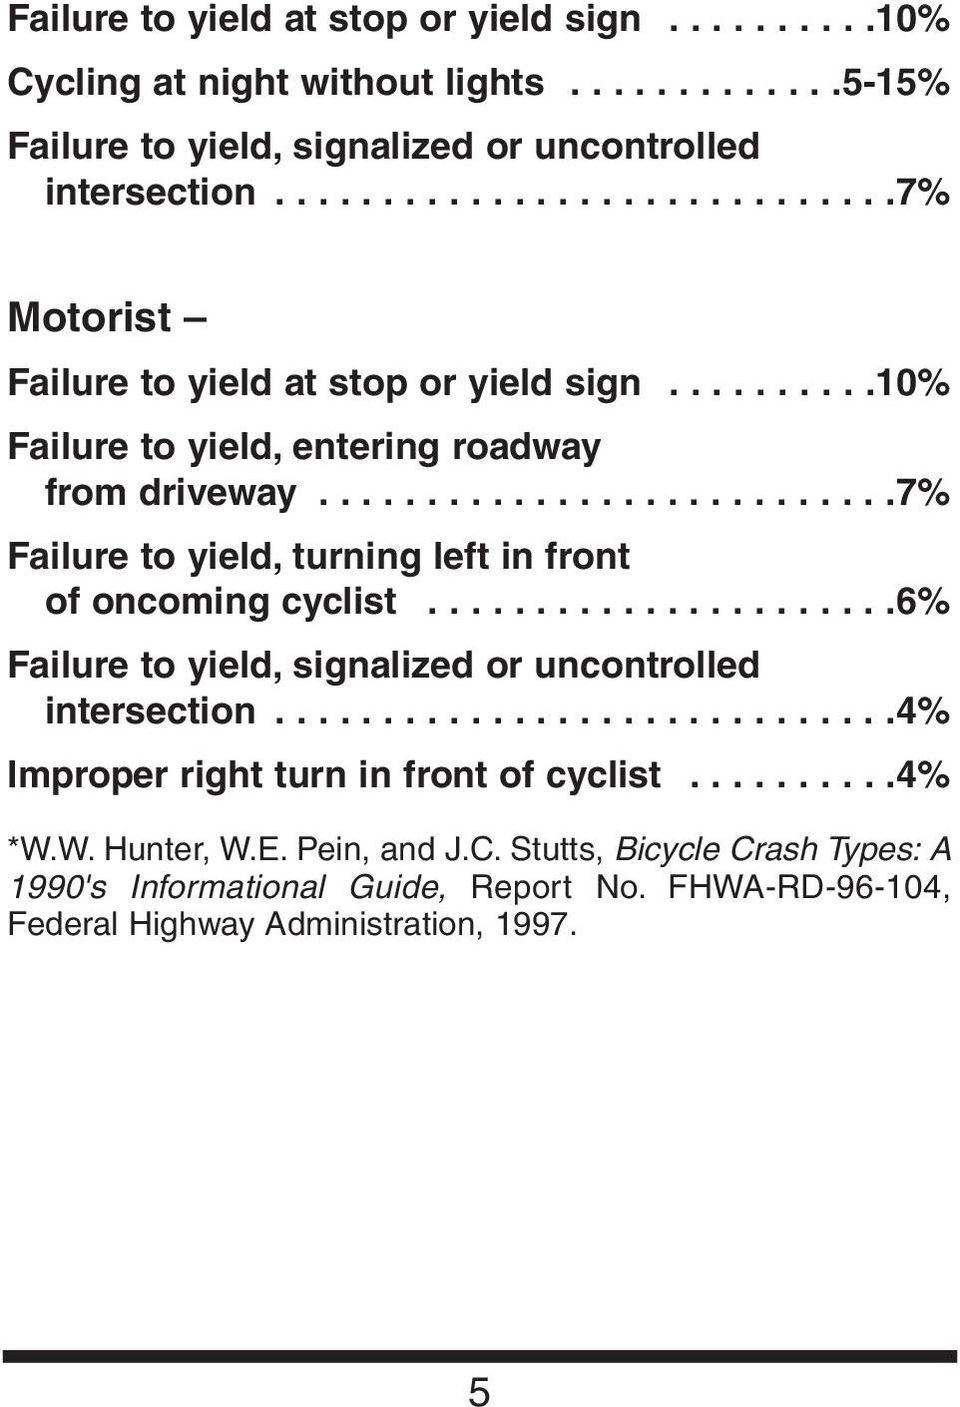 ..........................7% Failure to yield, turning left in front of oncoming cyclist......................6% Failure to yield, signalized or uncontrolled intersection.